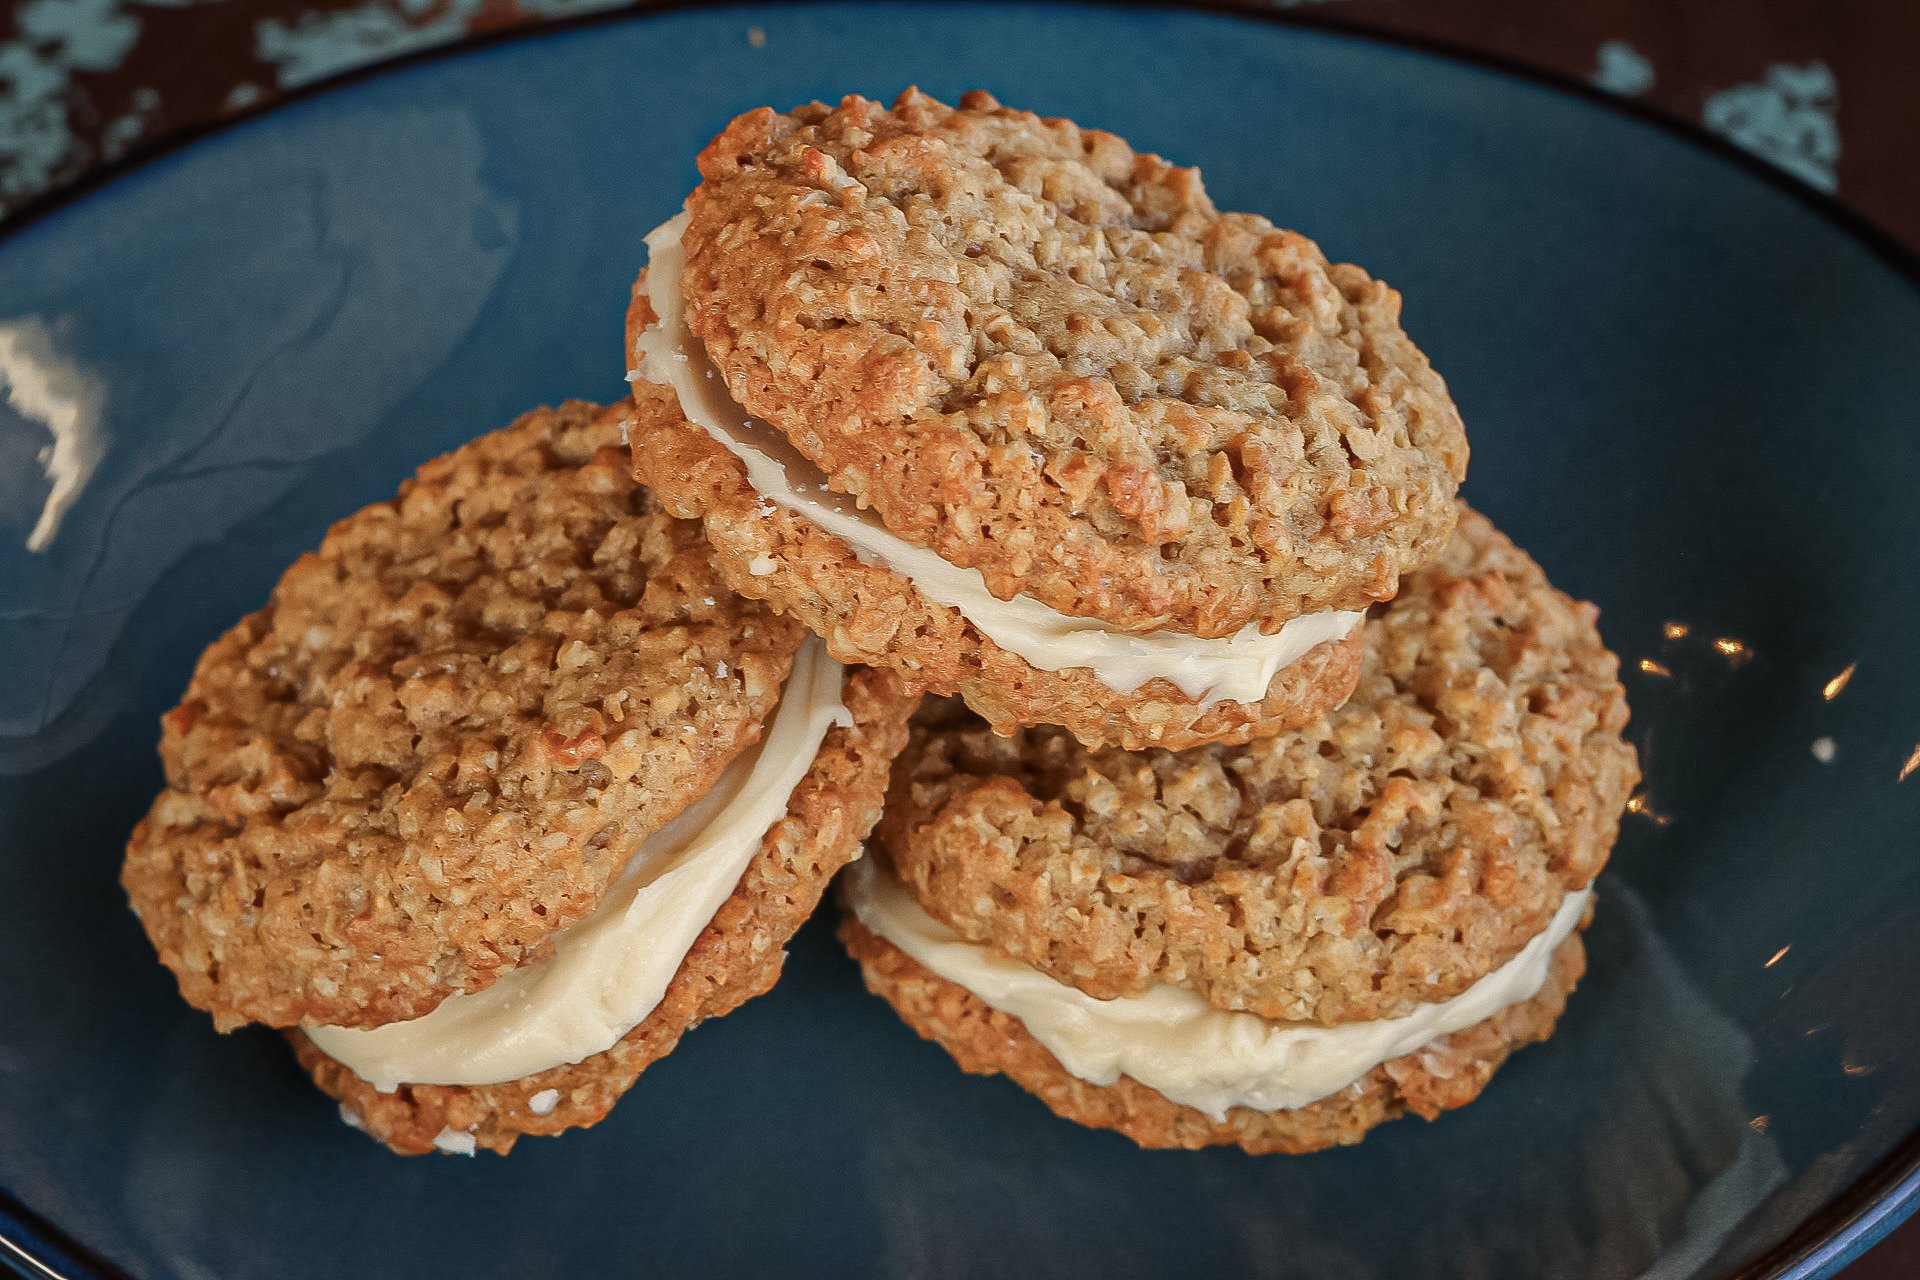 Our Oatmeal Butterscotch Sandwich Cookie is making its return for the special pastry this weekend!

Butterscotch, cinnamon, molasses and just a dash of salt come together to create this soft, sweet pastry. It's been a few months since we've served th